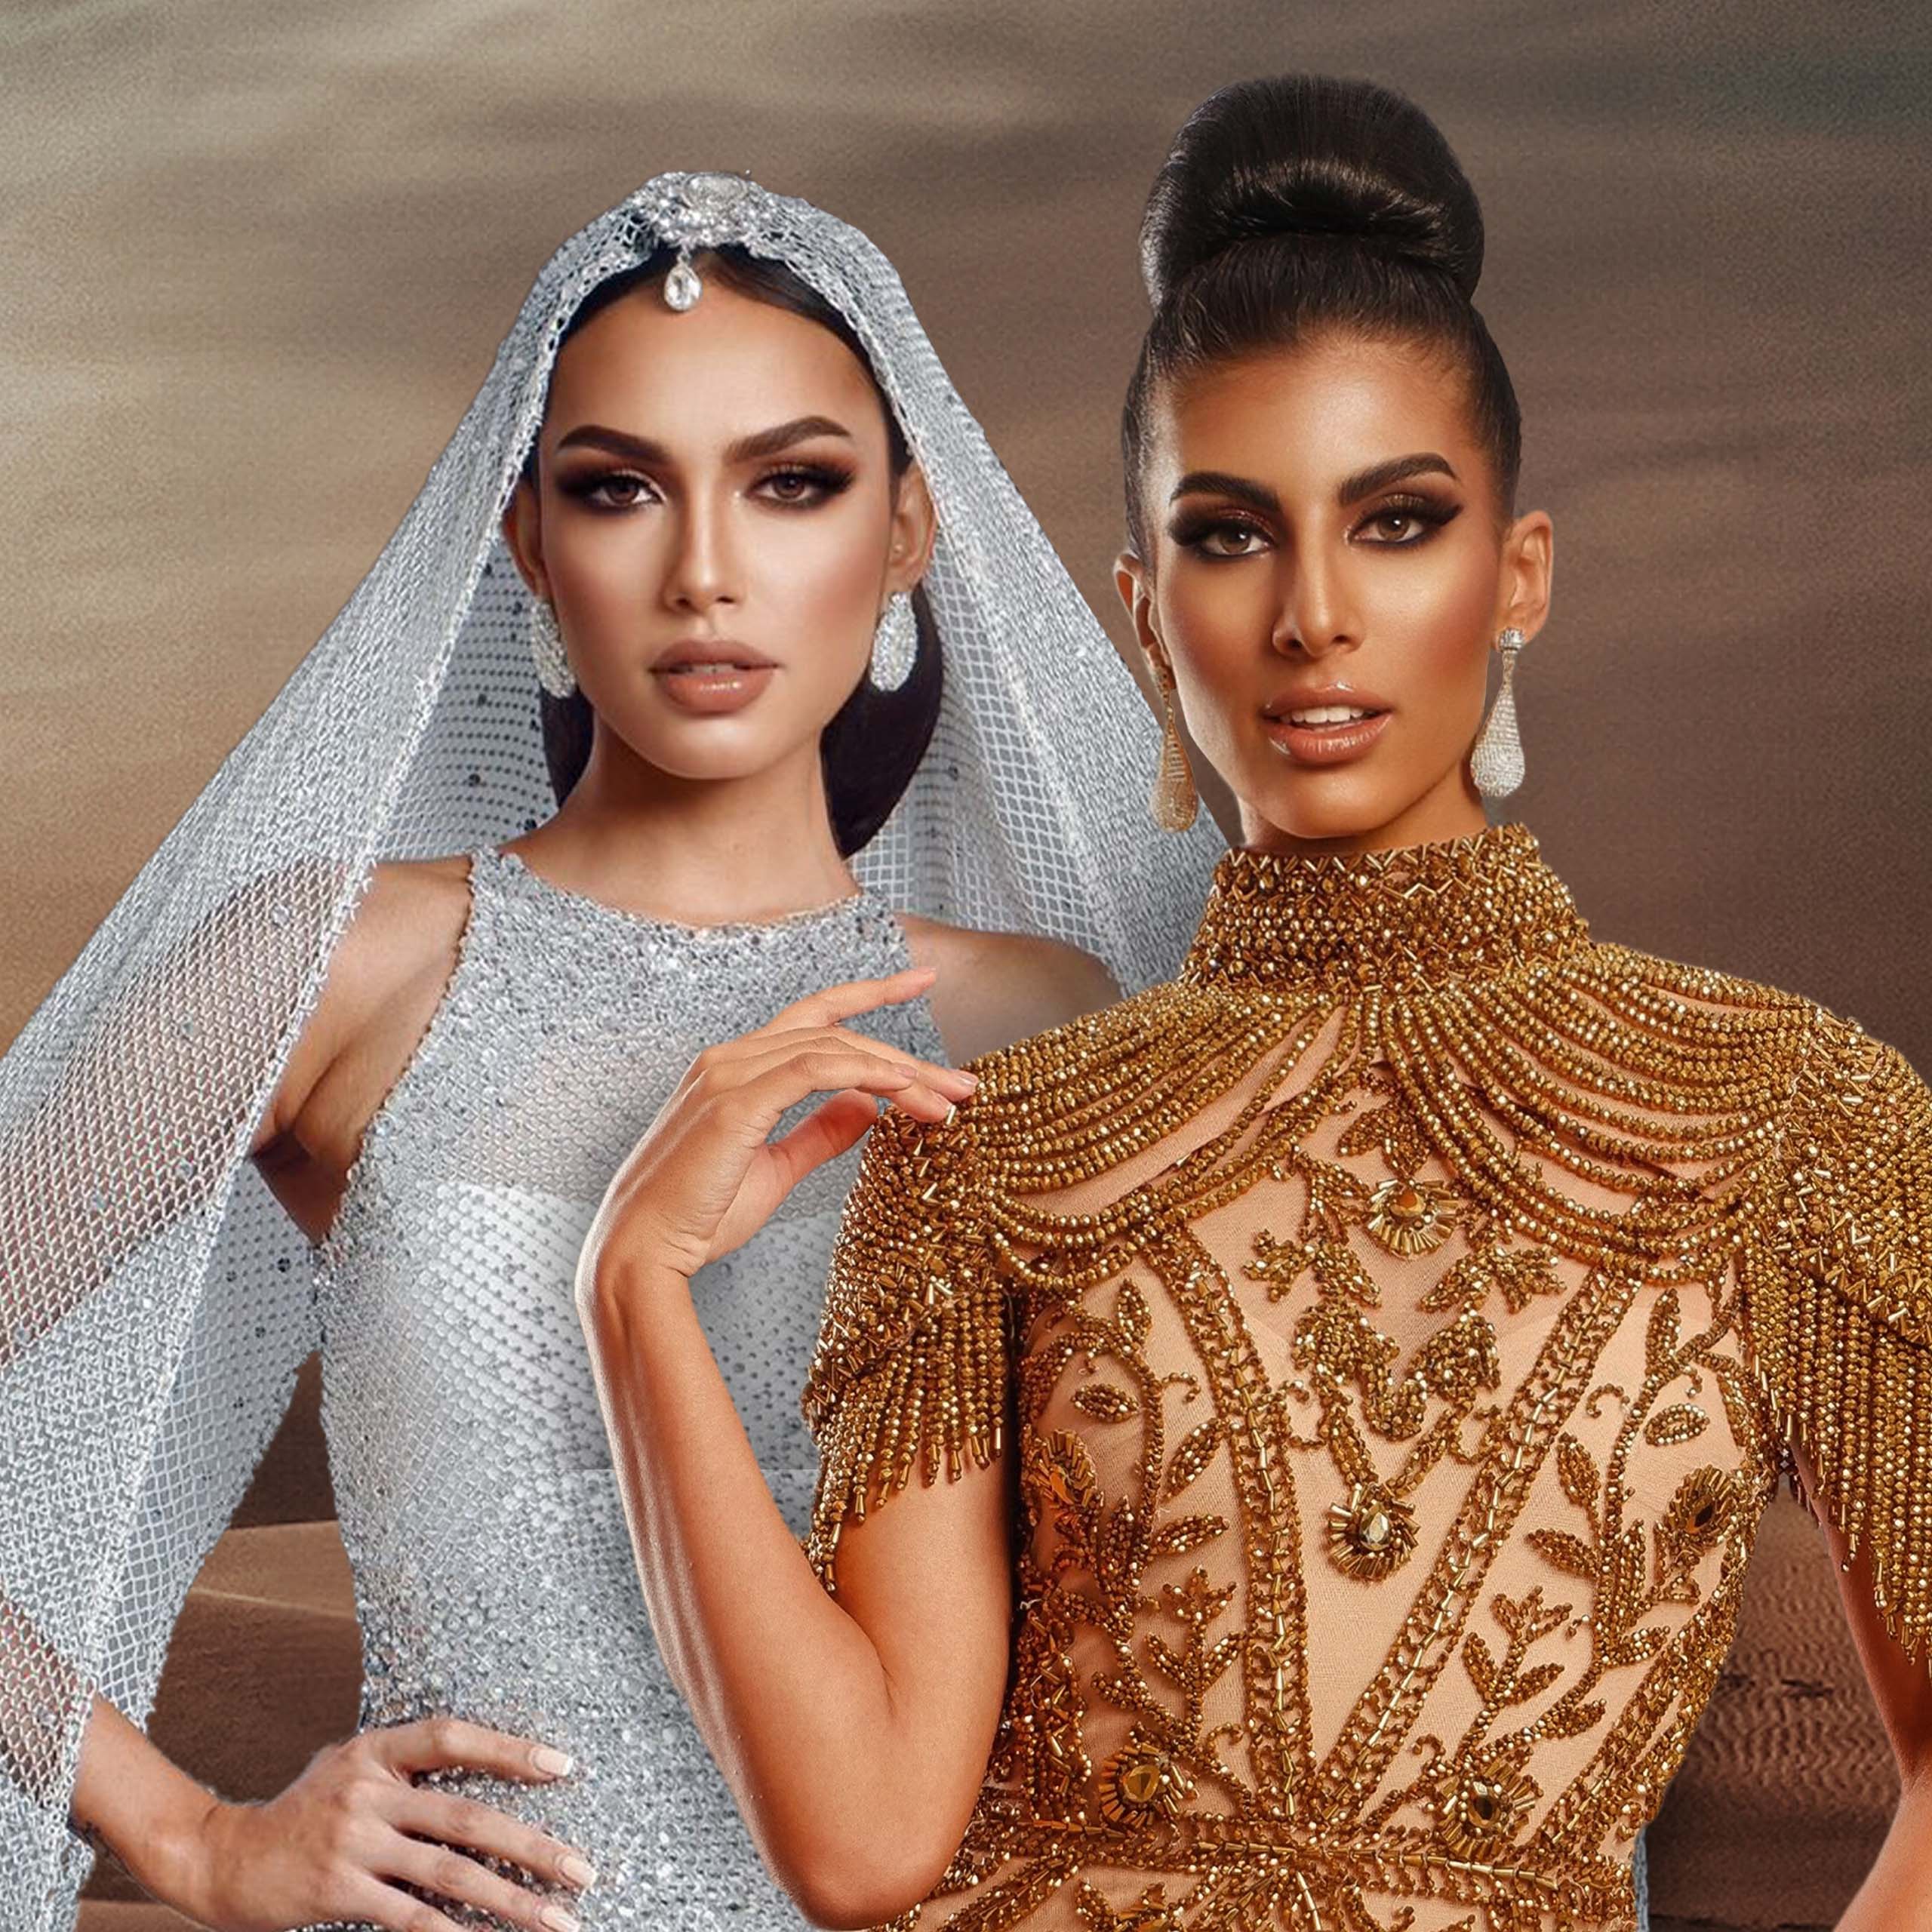 Filipino Designer Furne One Designs Two Miss Universe Gowns